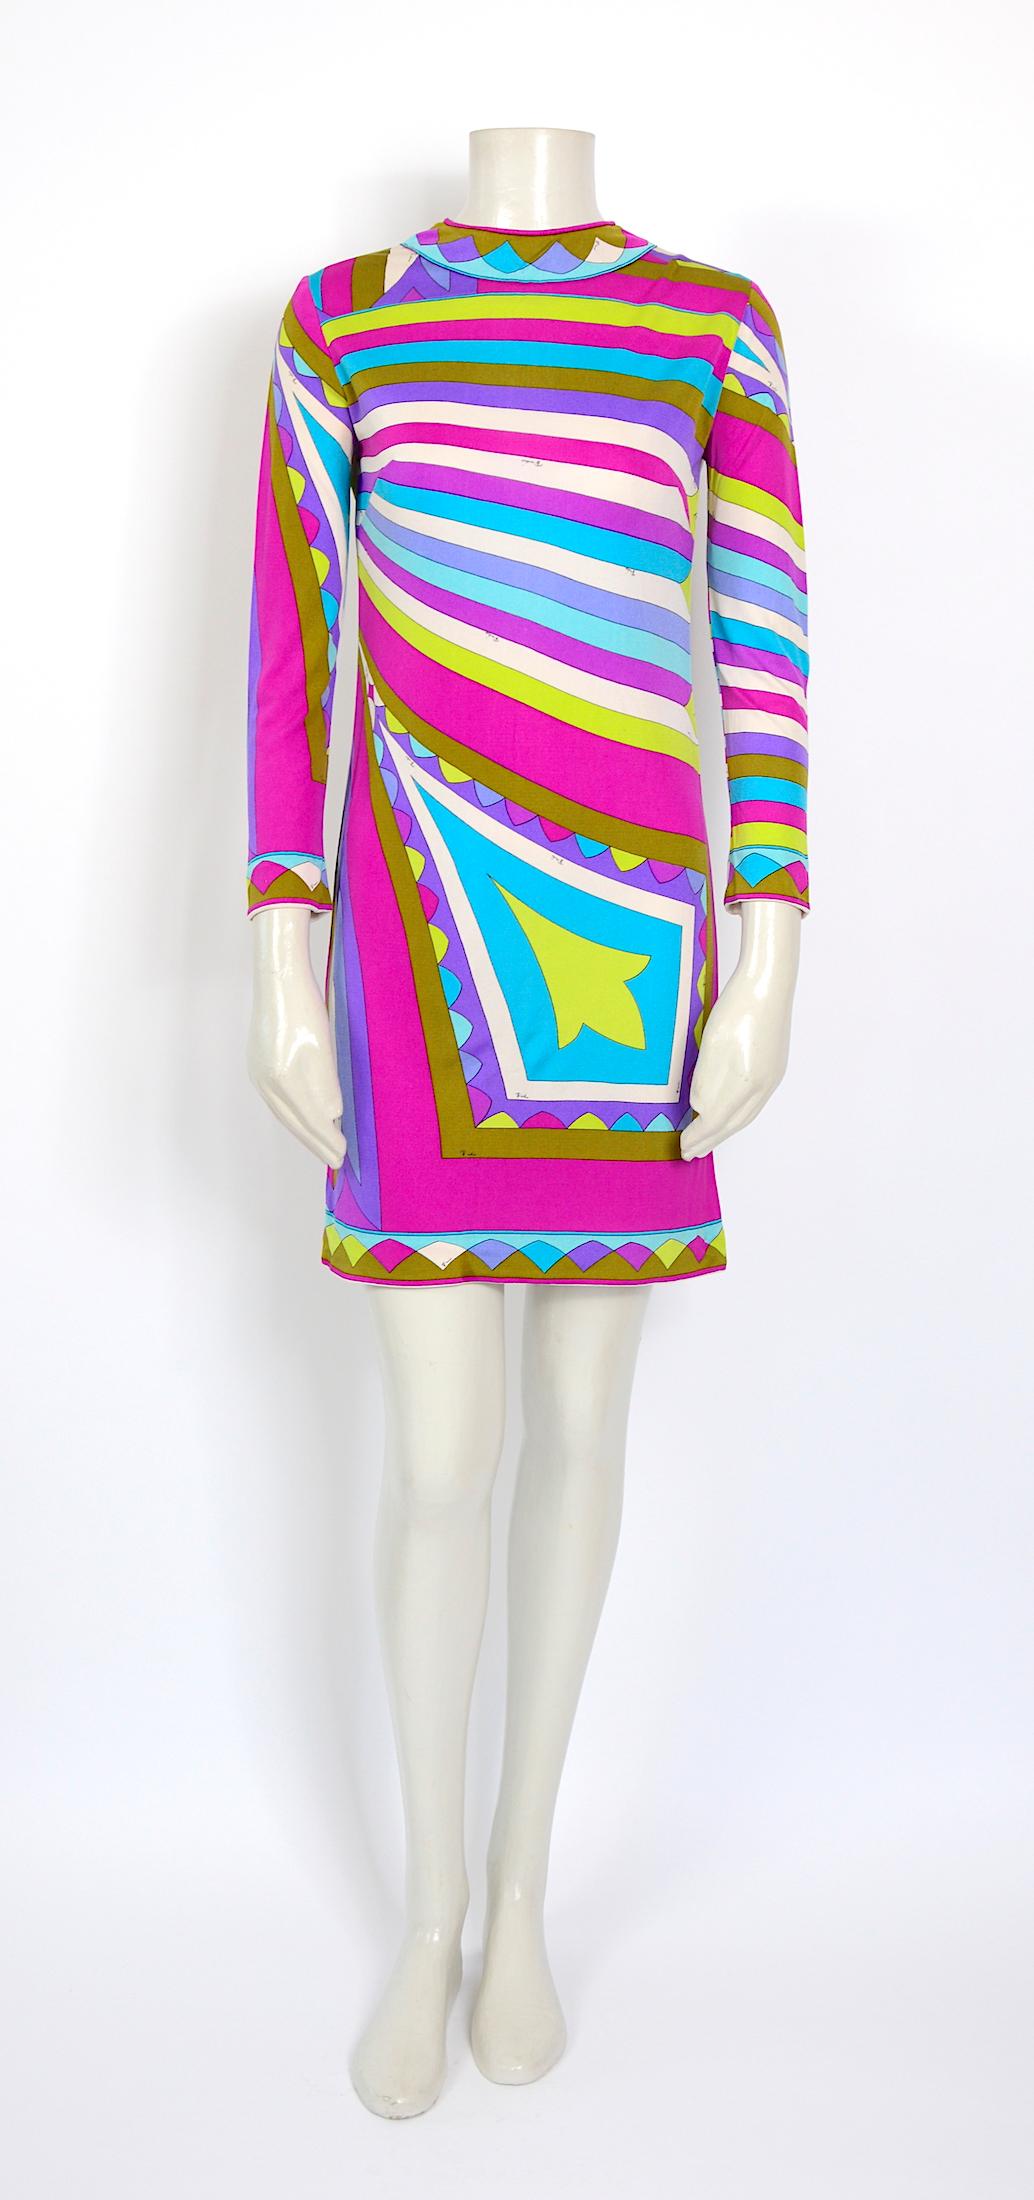 Gorgeous colorful signed silk jersey dress by Emilio Pucci.
Measurements are taken flat:
Sh to Sh 15inch/38cm - Ua to Ua -18inch/46cm(x2) - Waist 16inch/40,5cm(x2) - Hips 17inch/43cm(x2) - TL 33inch/84cm - Sl 20inch/51cm